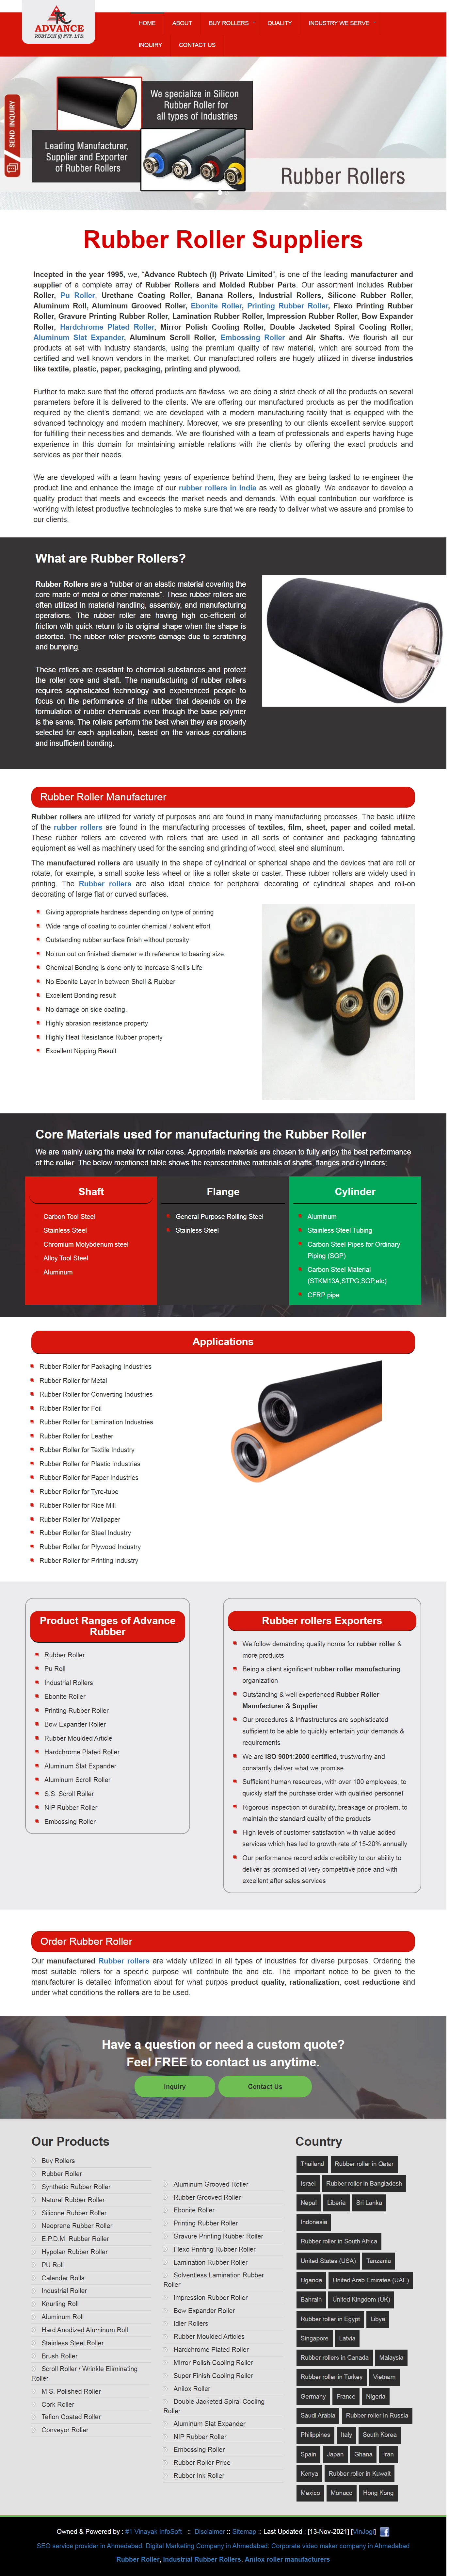 Rubber Roller Suppliers